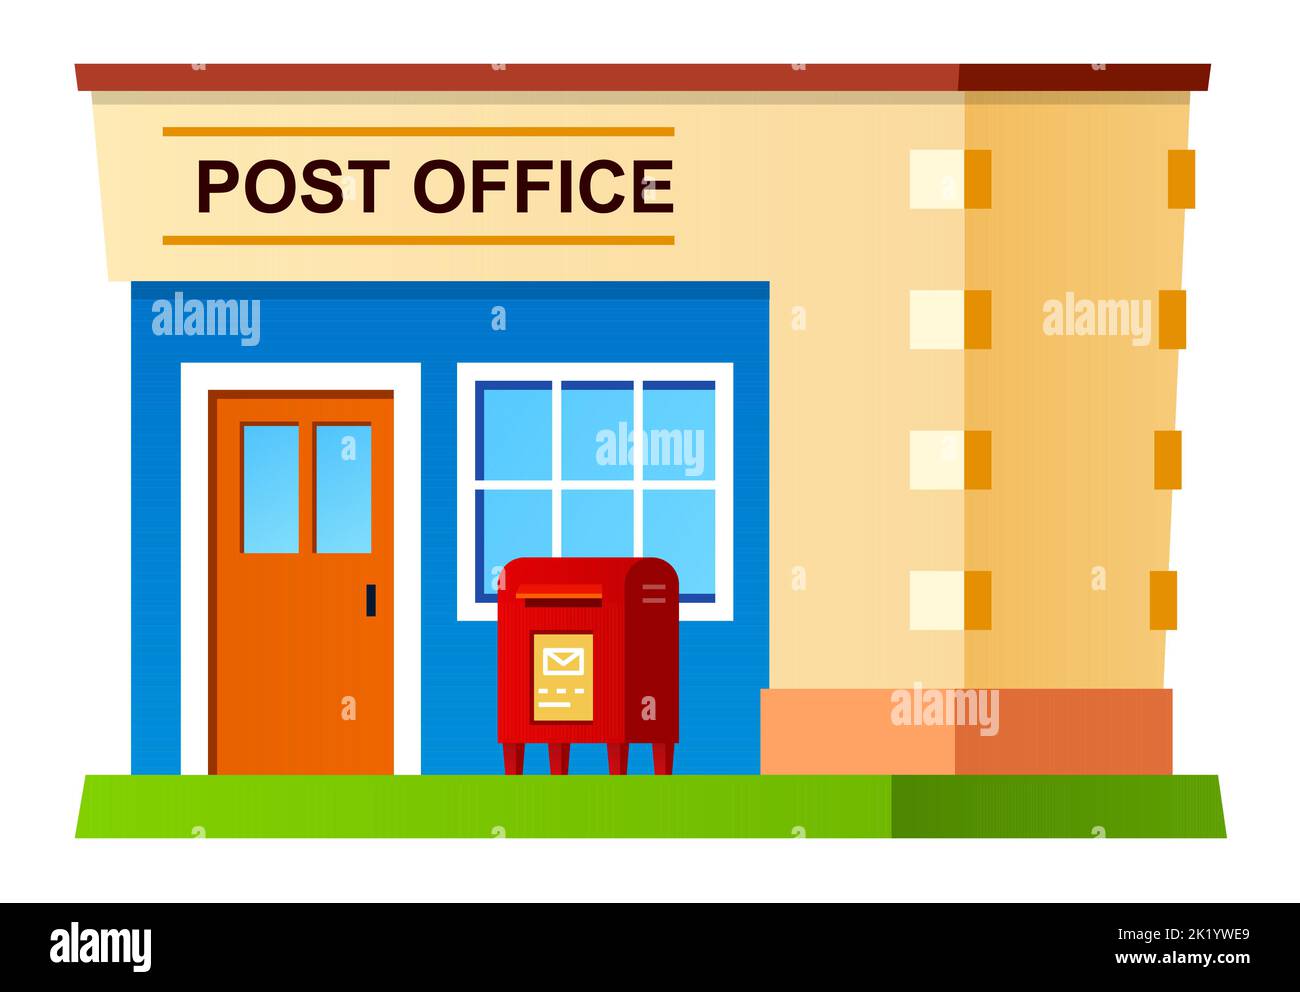 Post office - modern flat design style single isolated image Stock Vector